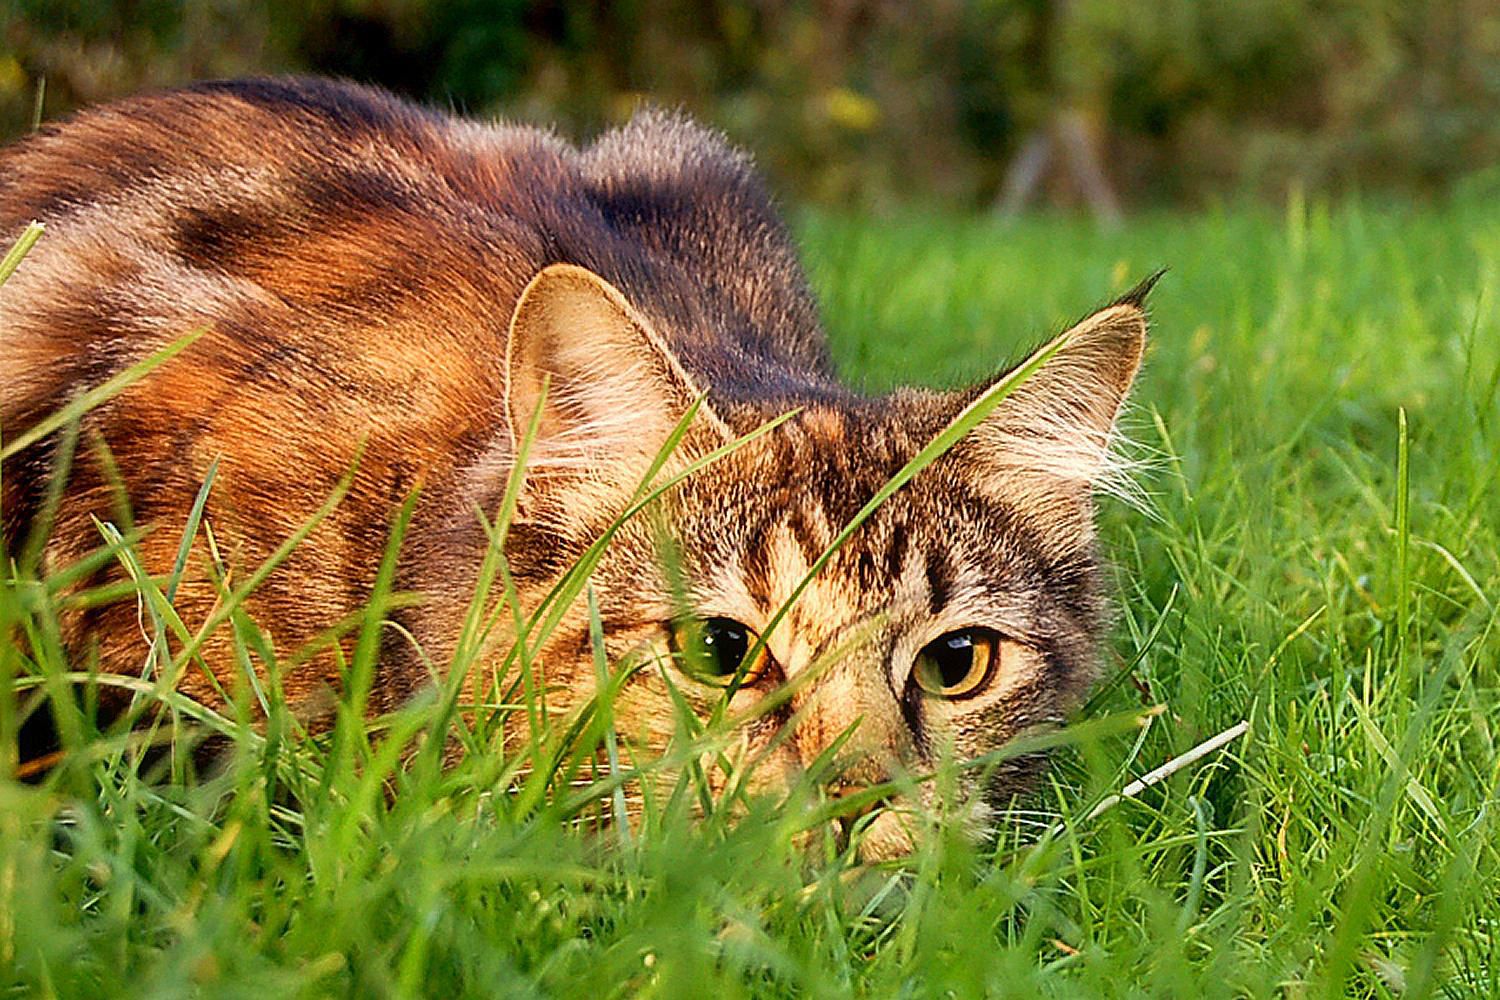 How to Keep Stray Cats Out of Your Yard - Safely